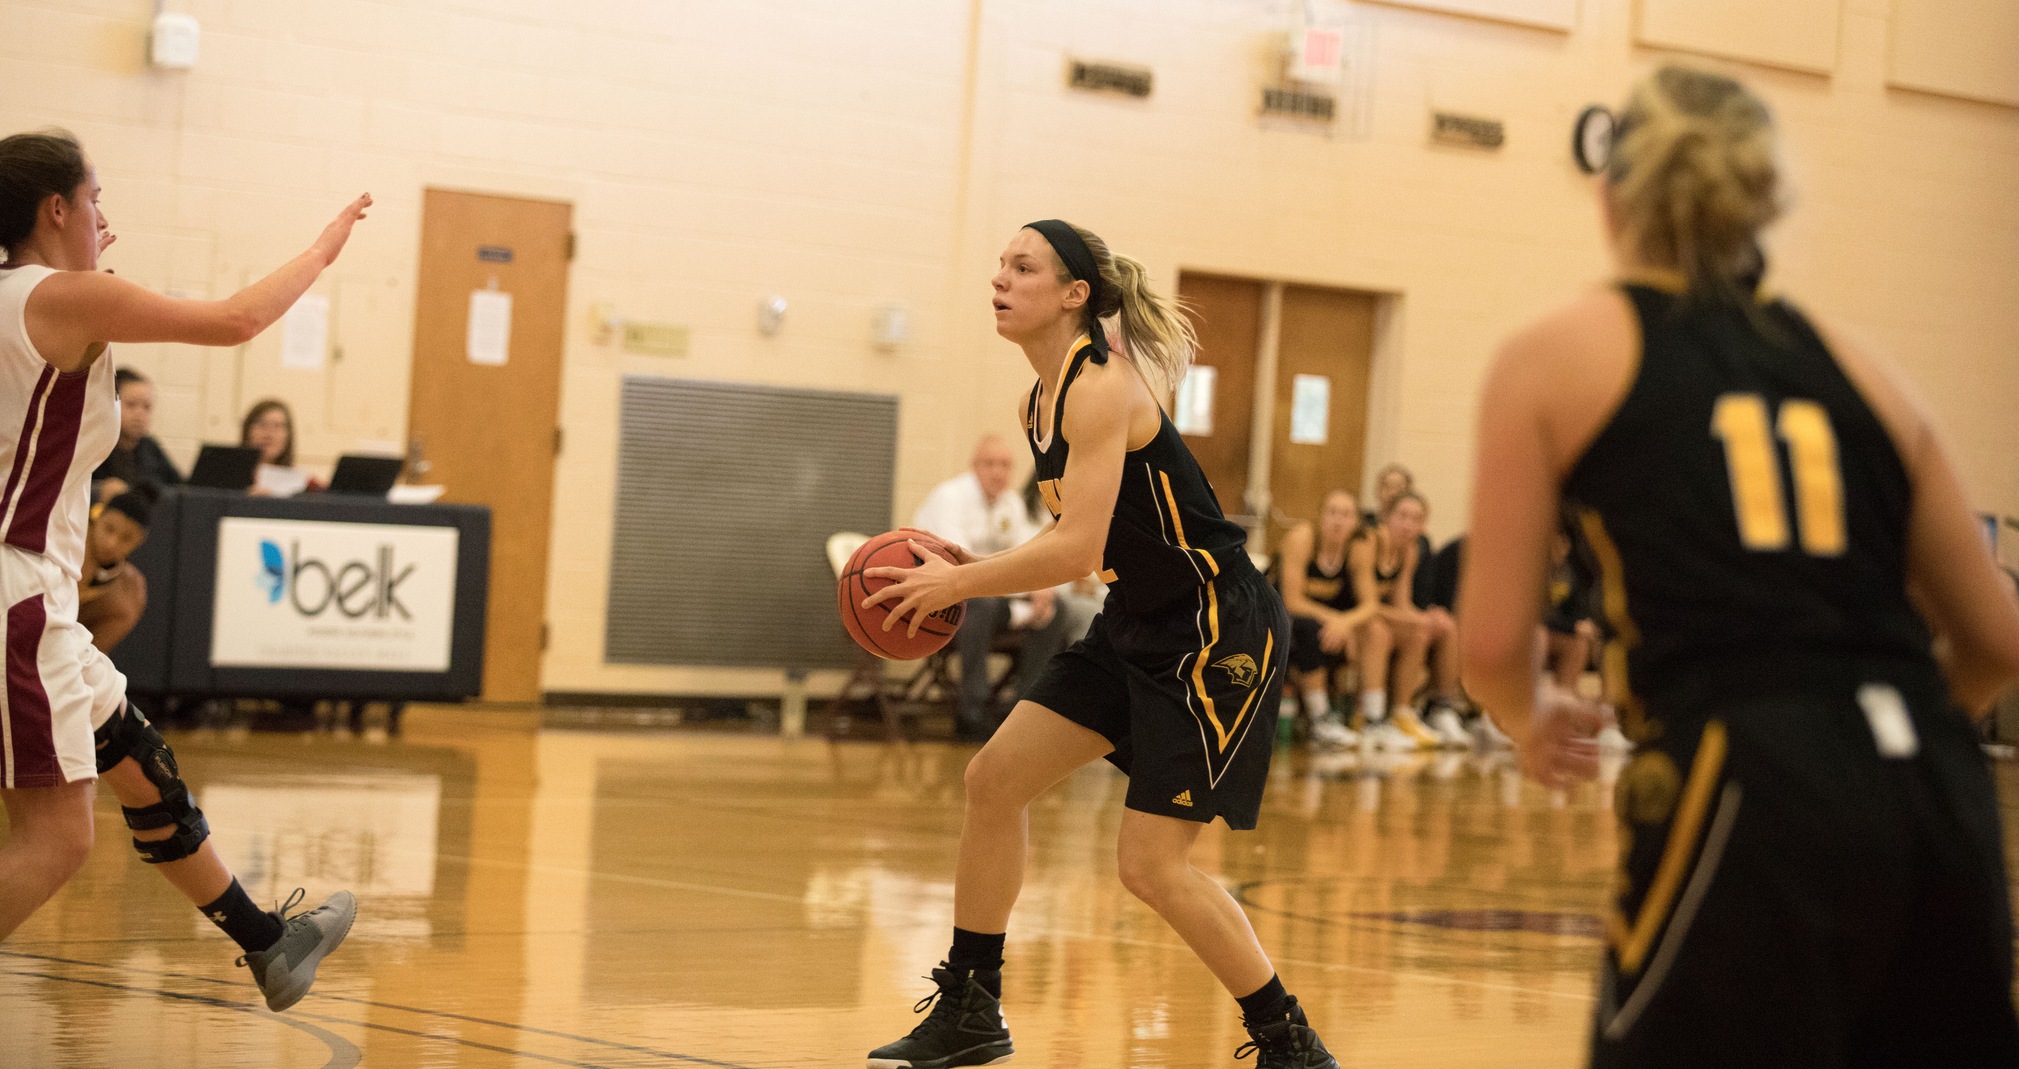 Melanie Schneider scored a career-high 13 points against the Avenging Angels.